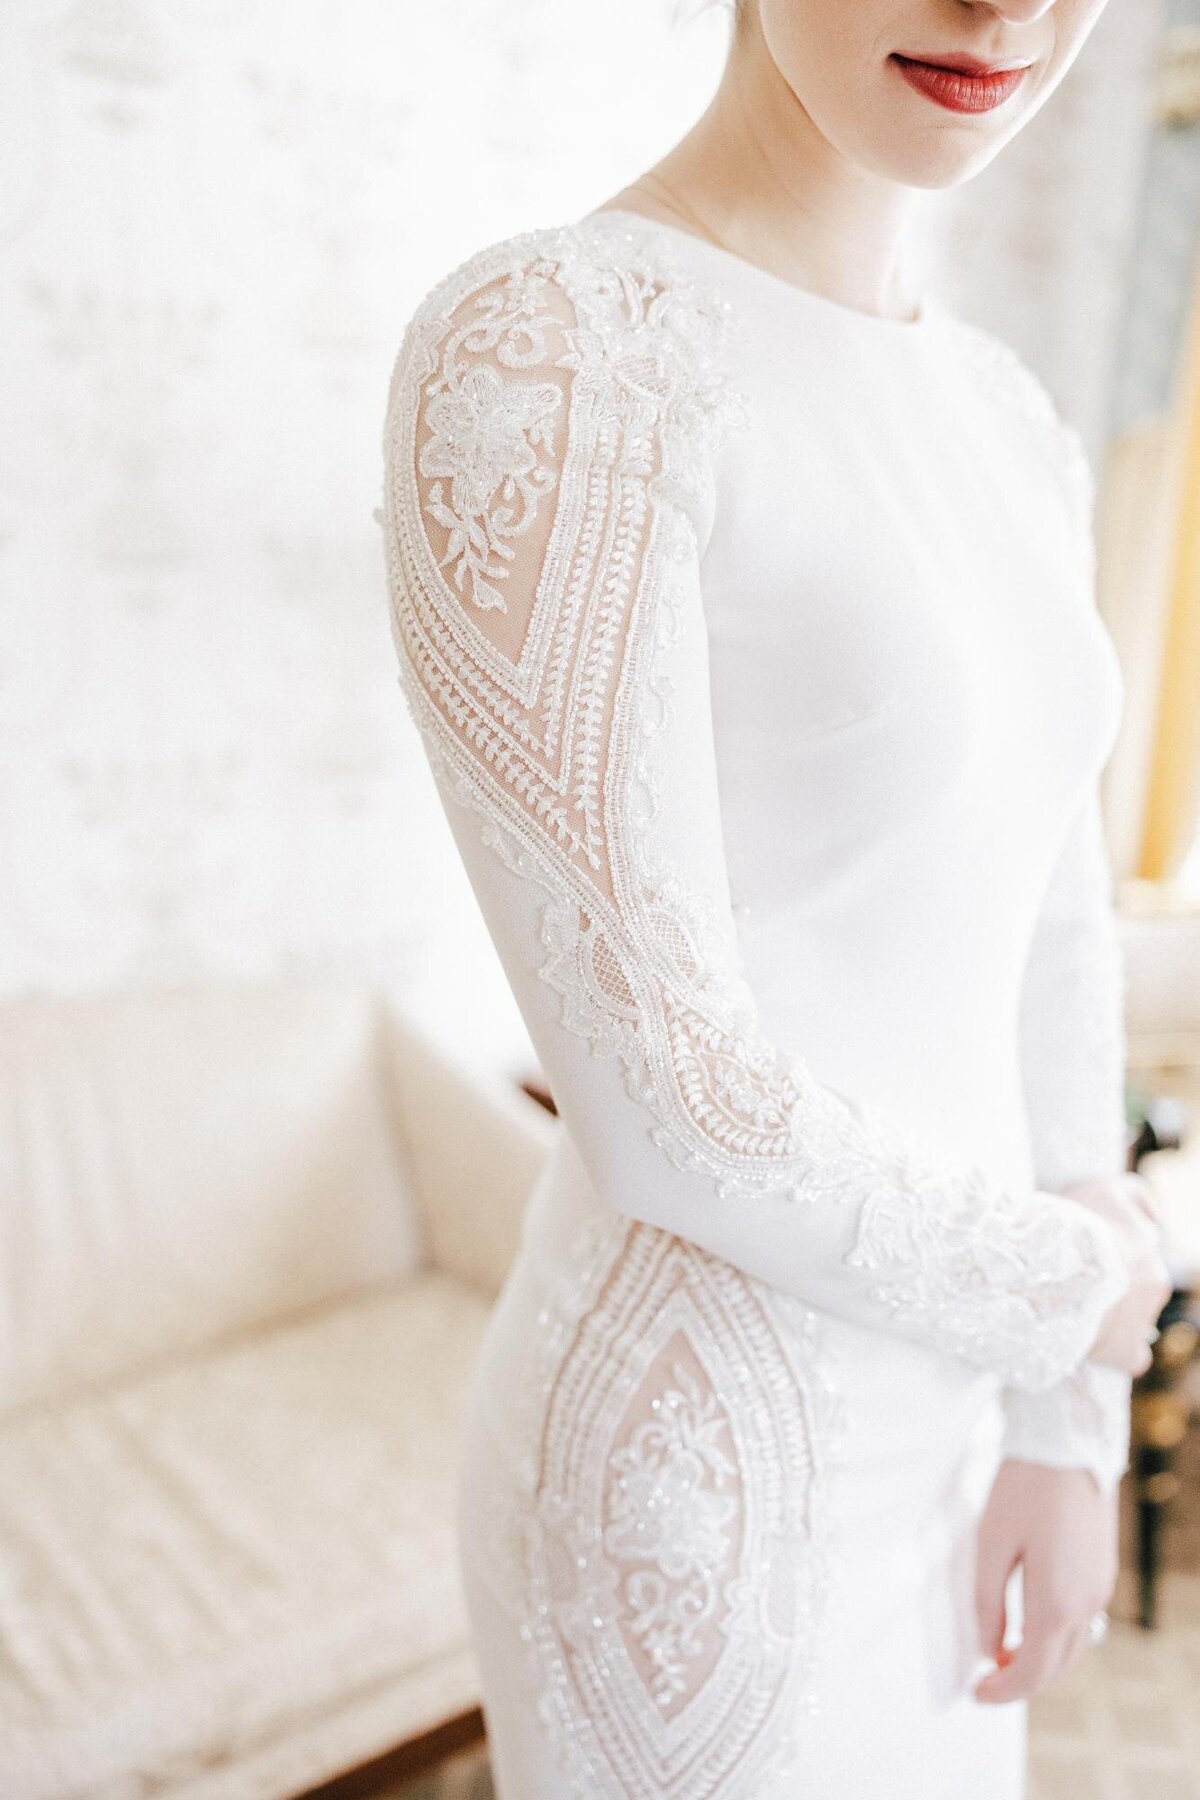 Elegant bridal dress with detailed lace patterns.